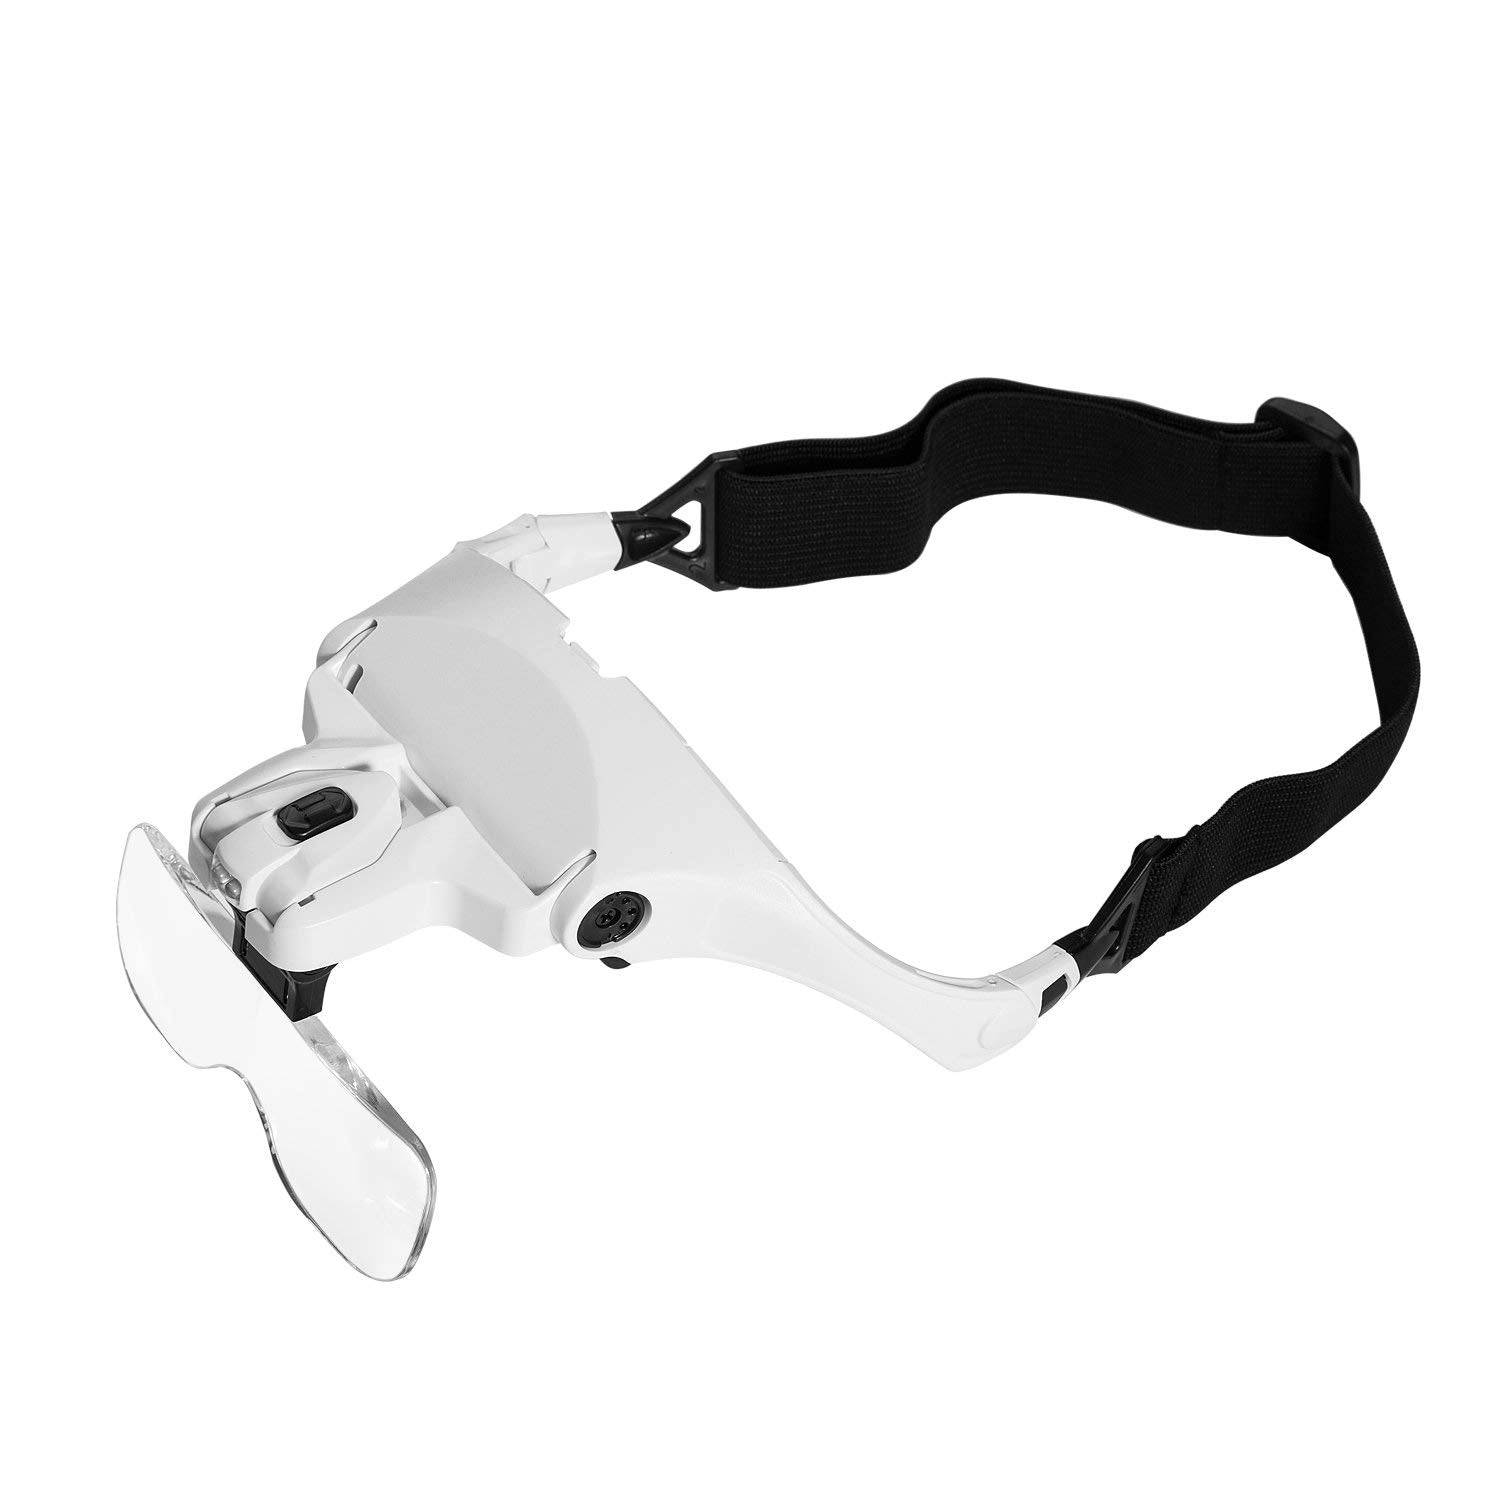 Headband Magnifier with LED Light, Head Mount Magnifier Glasses Light